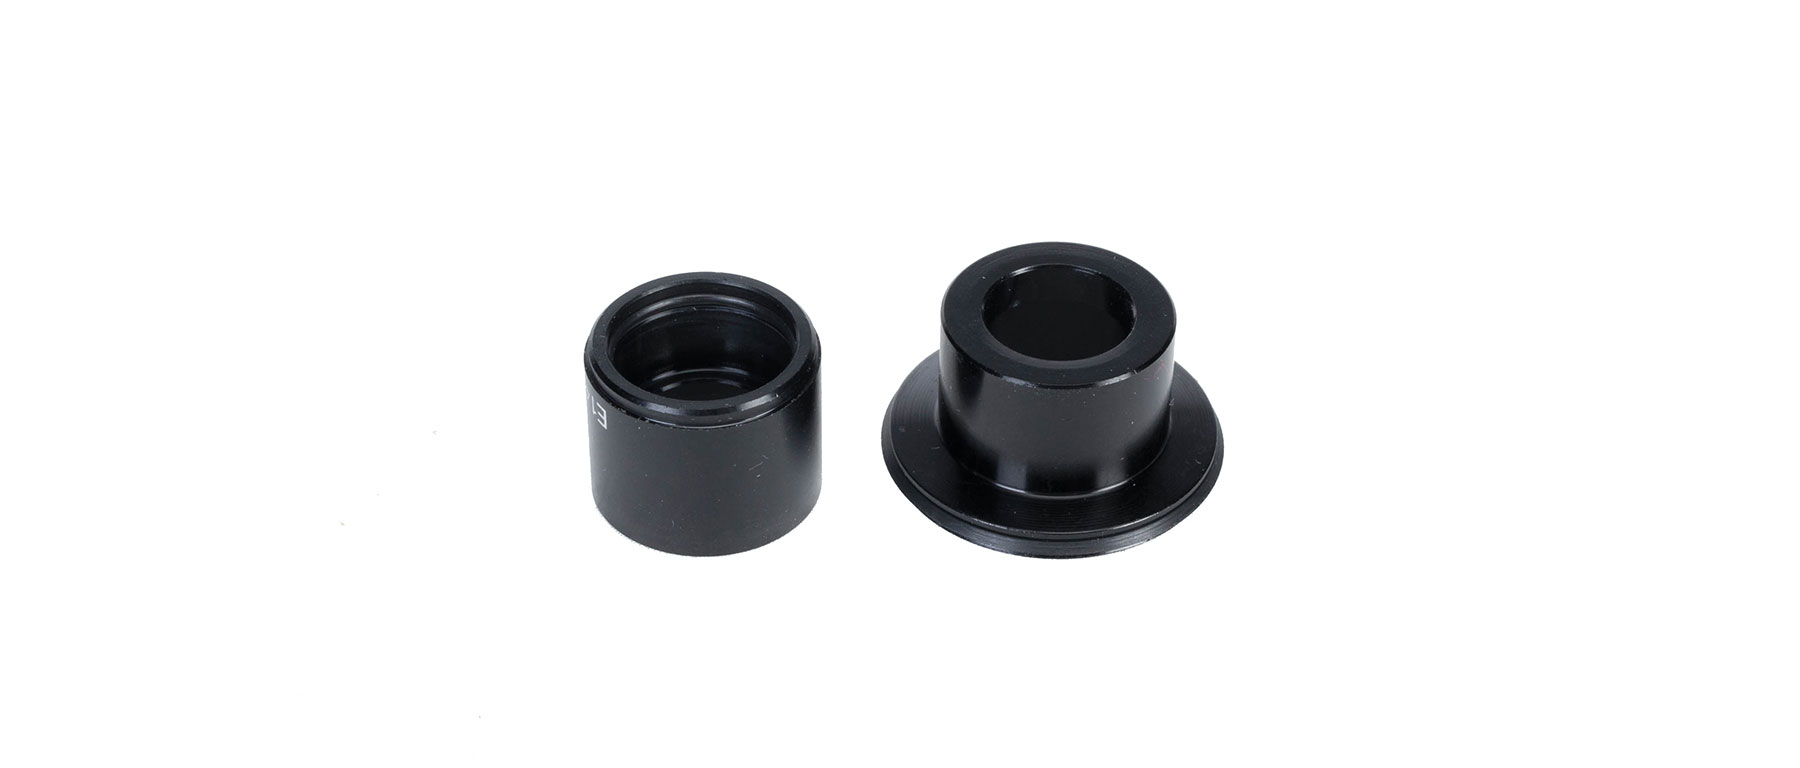 Stans NoTubes NEO Hub End Caps